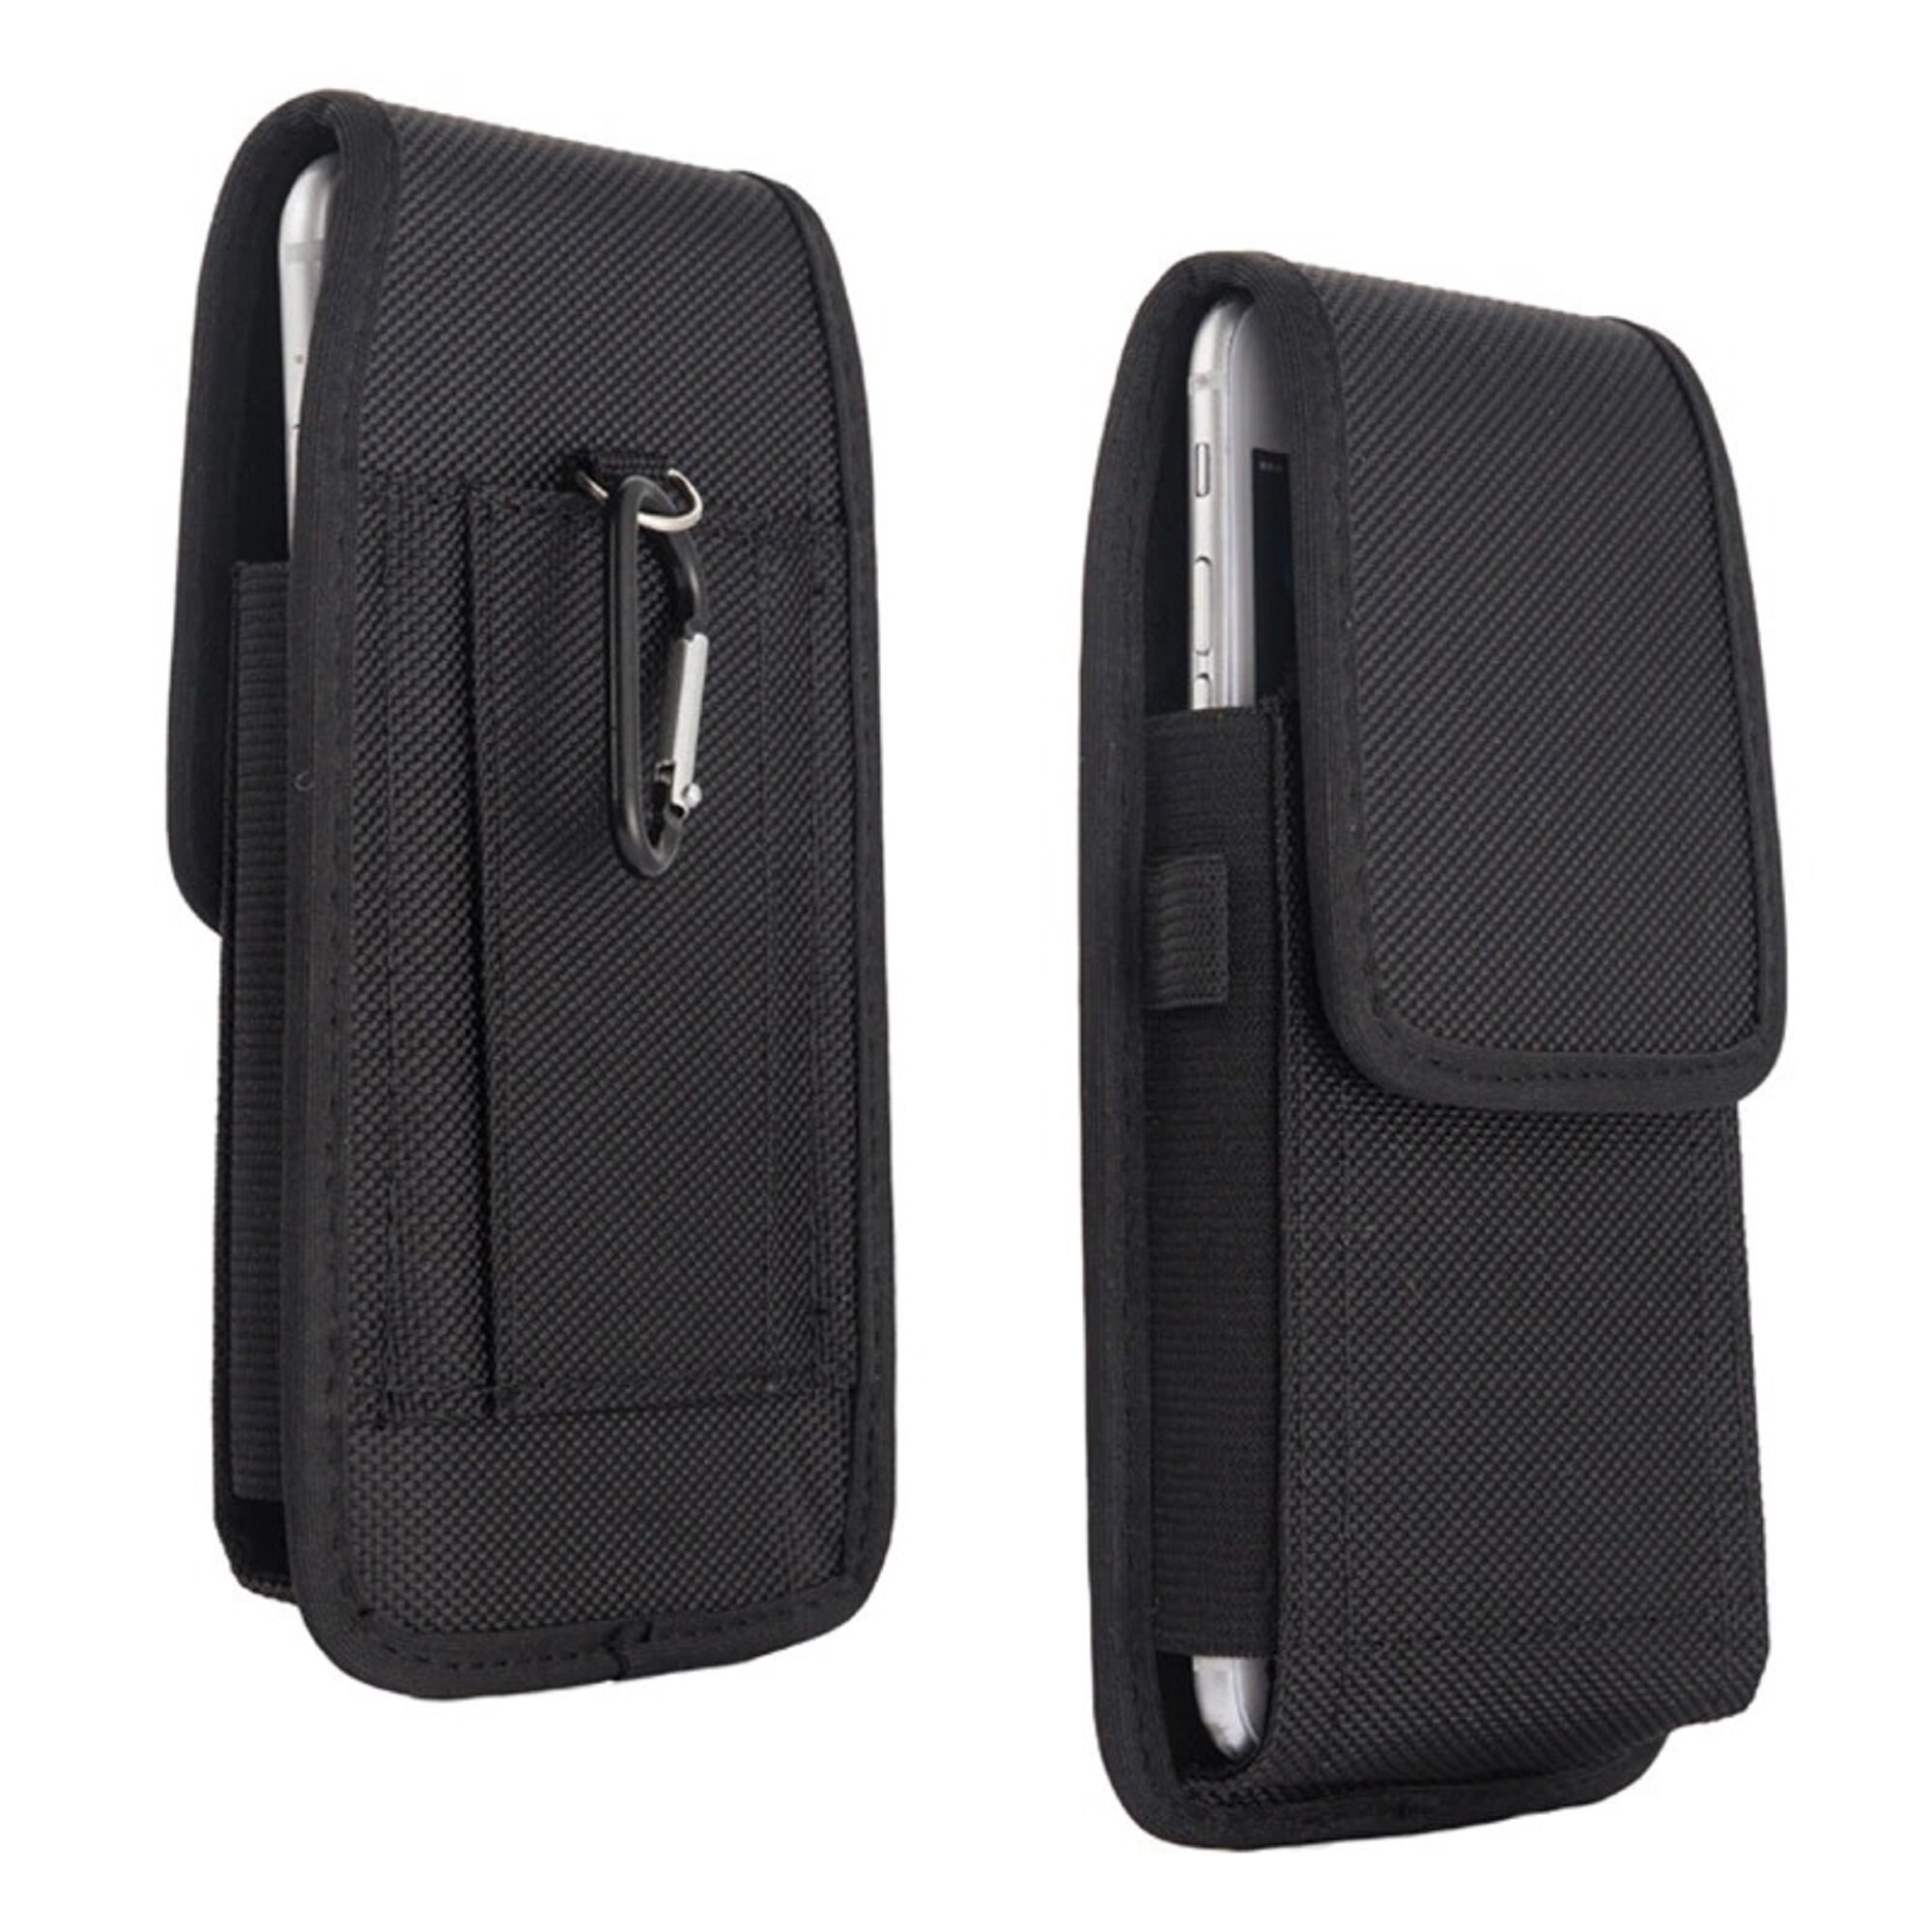 Black Smart Phone Pouch Travel Wallet for Phone iPhone Samsung Huawei ...